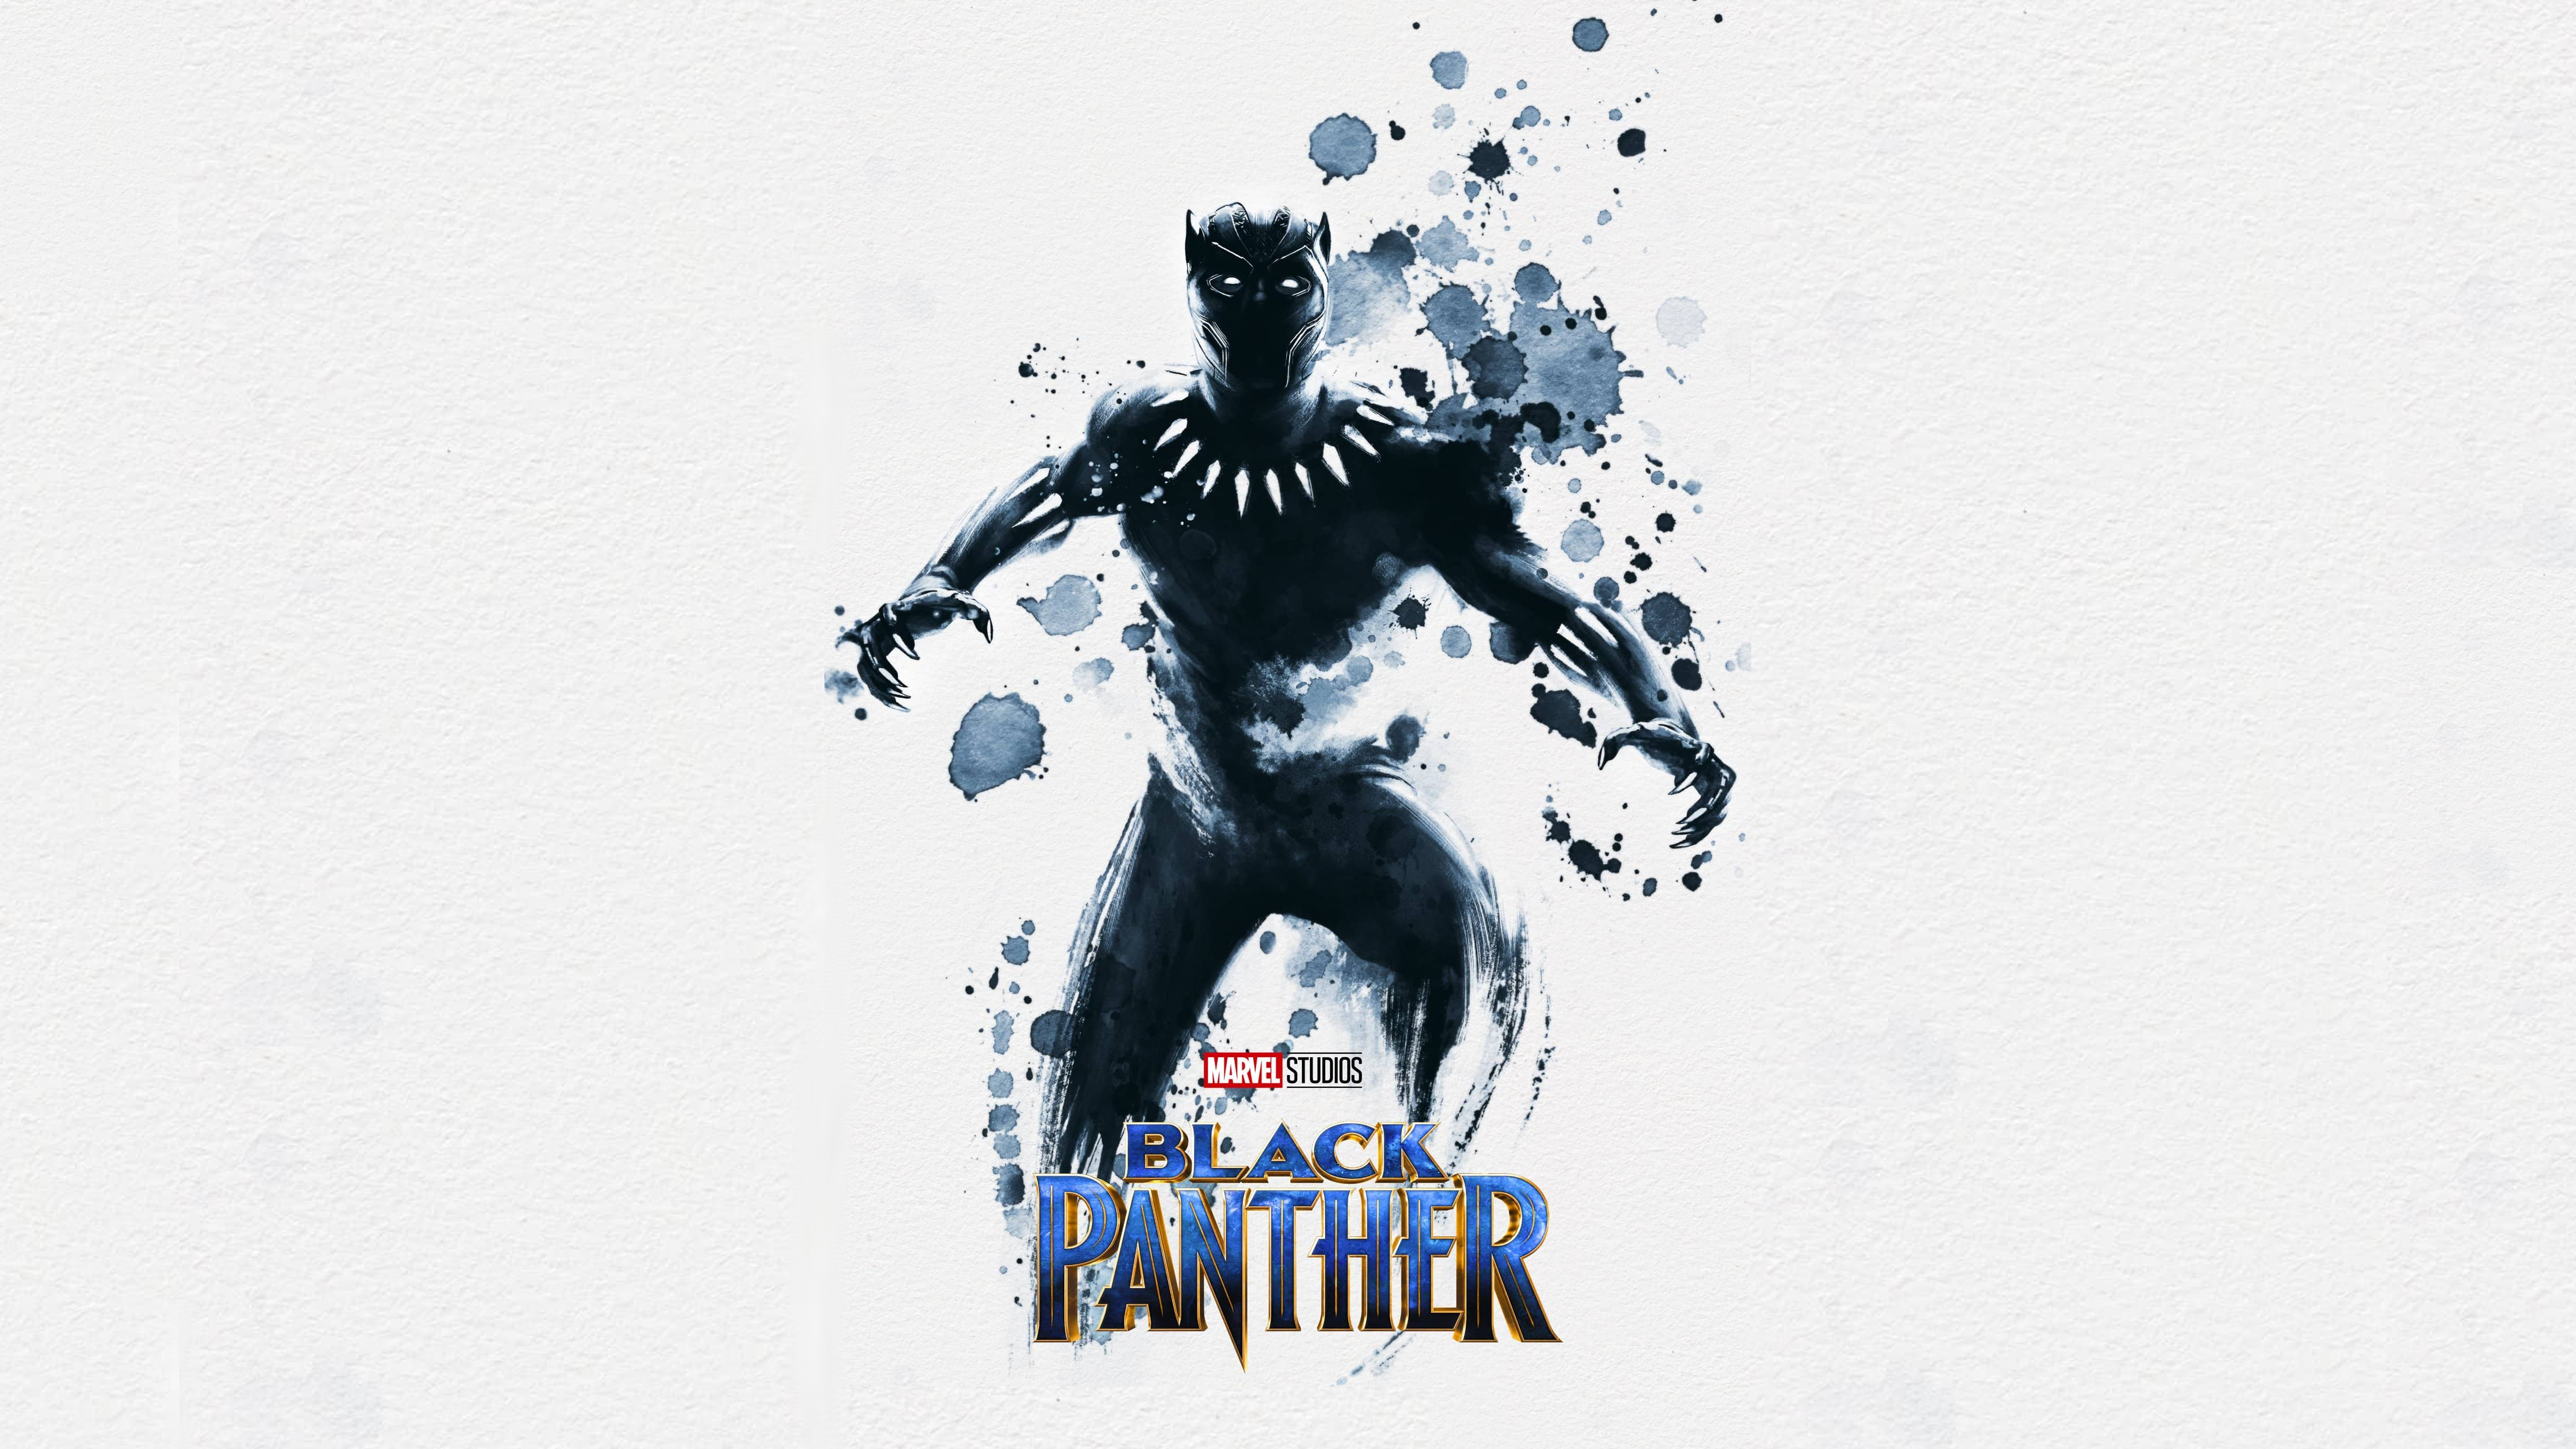 Black Panther - IMAX Poster Wallpaper Conversion by Supremacy by Supremacy